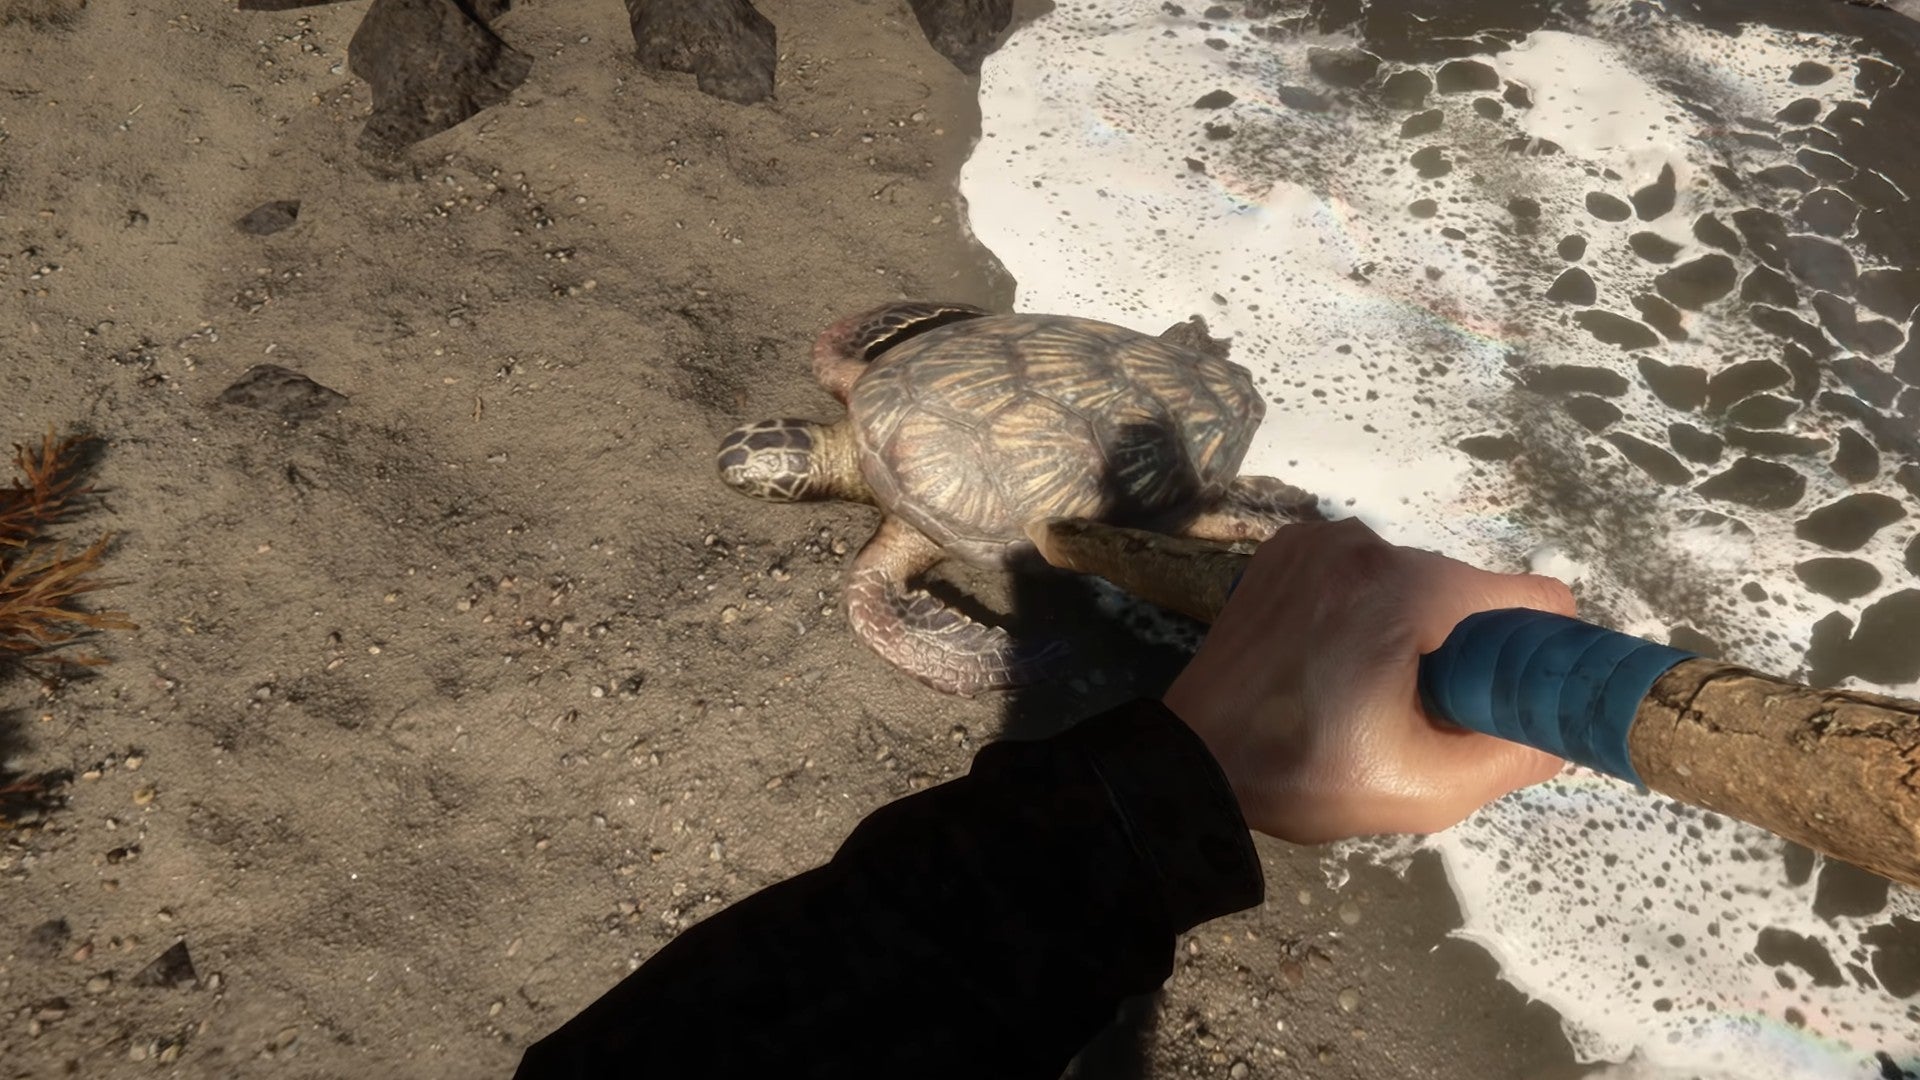 A player aims a spear at a turtle in Sons of the Forest.